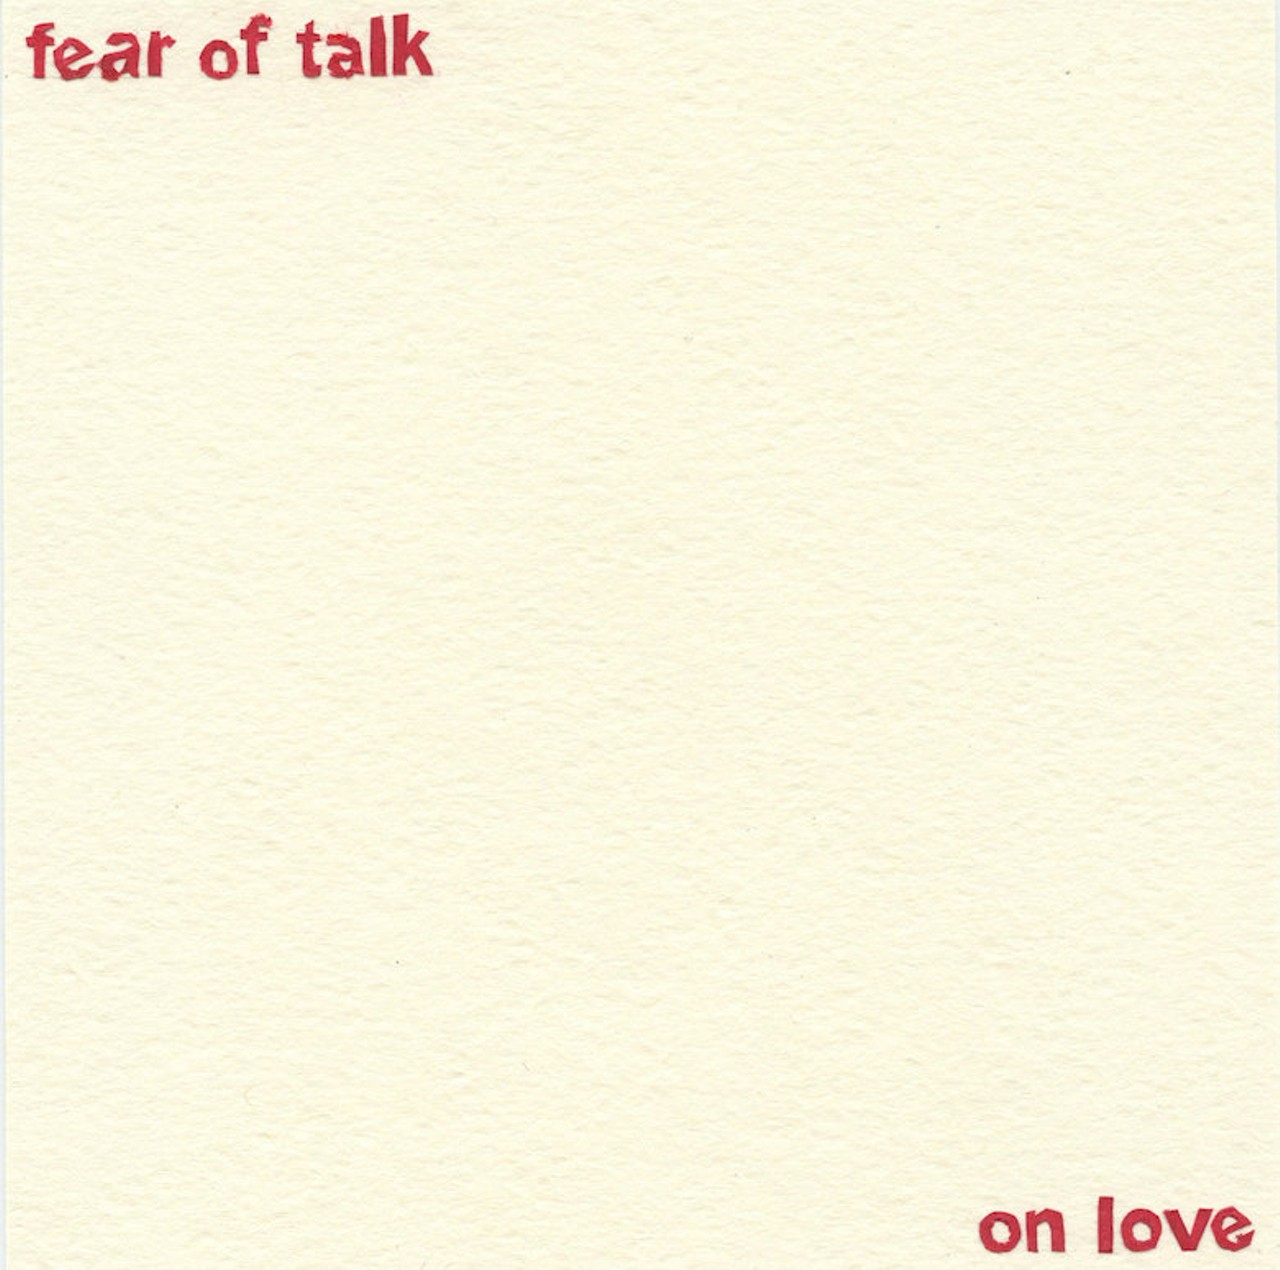 Fear of Talk 
eliza out back, end of day 
The subject of parenting, mortality and aging is addressed in such an obvious and familiar way throughout the album on love by Fear of Talk. The story told in &#147;eliza out back, end of day&#148; is such a simple, slice-of-life story about someone, ostensibly their father, watching siblings play in the backyard. The kids are full of life and joy, challenging one another in the silly and sometimes unintentionally unkind ways that children play. And that&#146;s how the young learn, to engage, to be silly, to find magic and mystery wherever they turn. It&#146;s here that the singer reflects on the scene, watching their love and happiness in just being. Through that, the character juggles the twin responsibilities of ensuring the safety of these children, while noting the passage of time. As a parent, this is so unbelievably close to my heart, watching my own children live, while acclimating to middle age. Coupled with softly strummed acoustics and the type of layered vocal harmonies that would make Crosby, Stills, and Nash weep, this is an incredibly joyous and moving experience worth finding on your own. &#151;Syd Bishop
Listen on Bandcamp